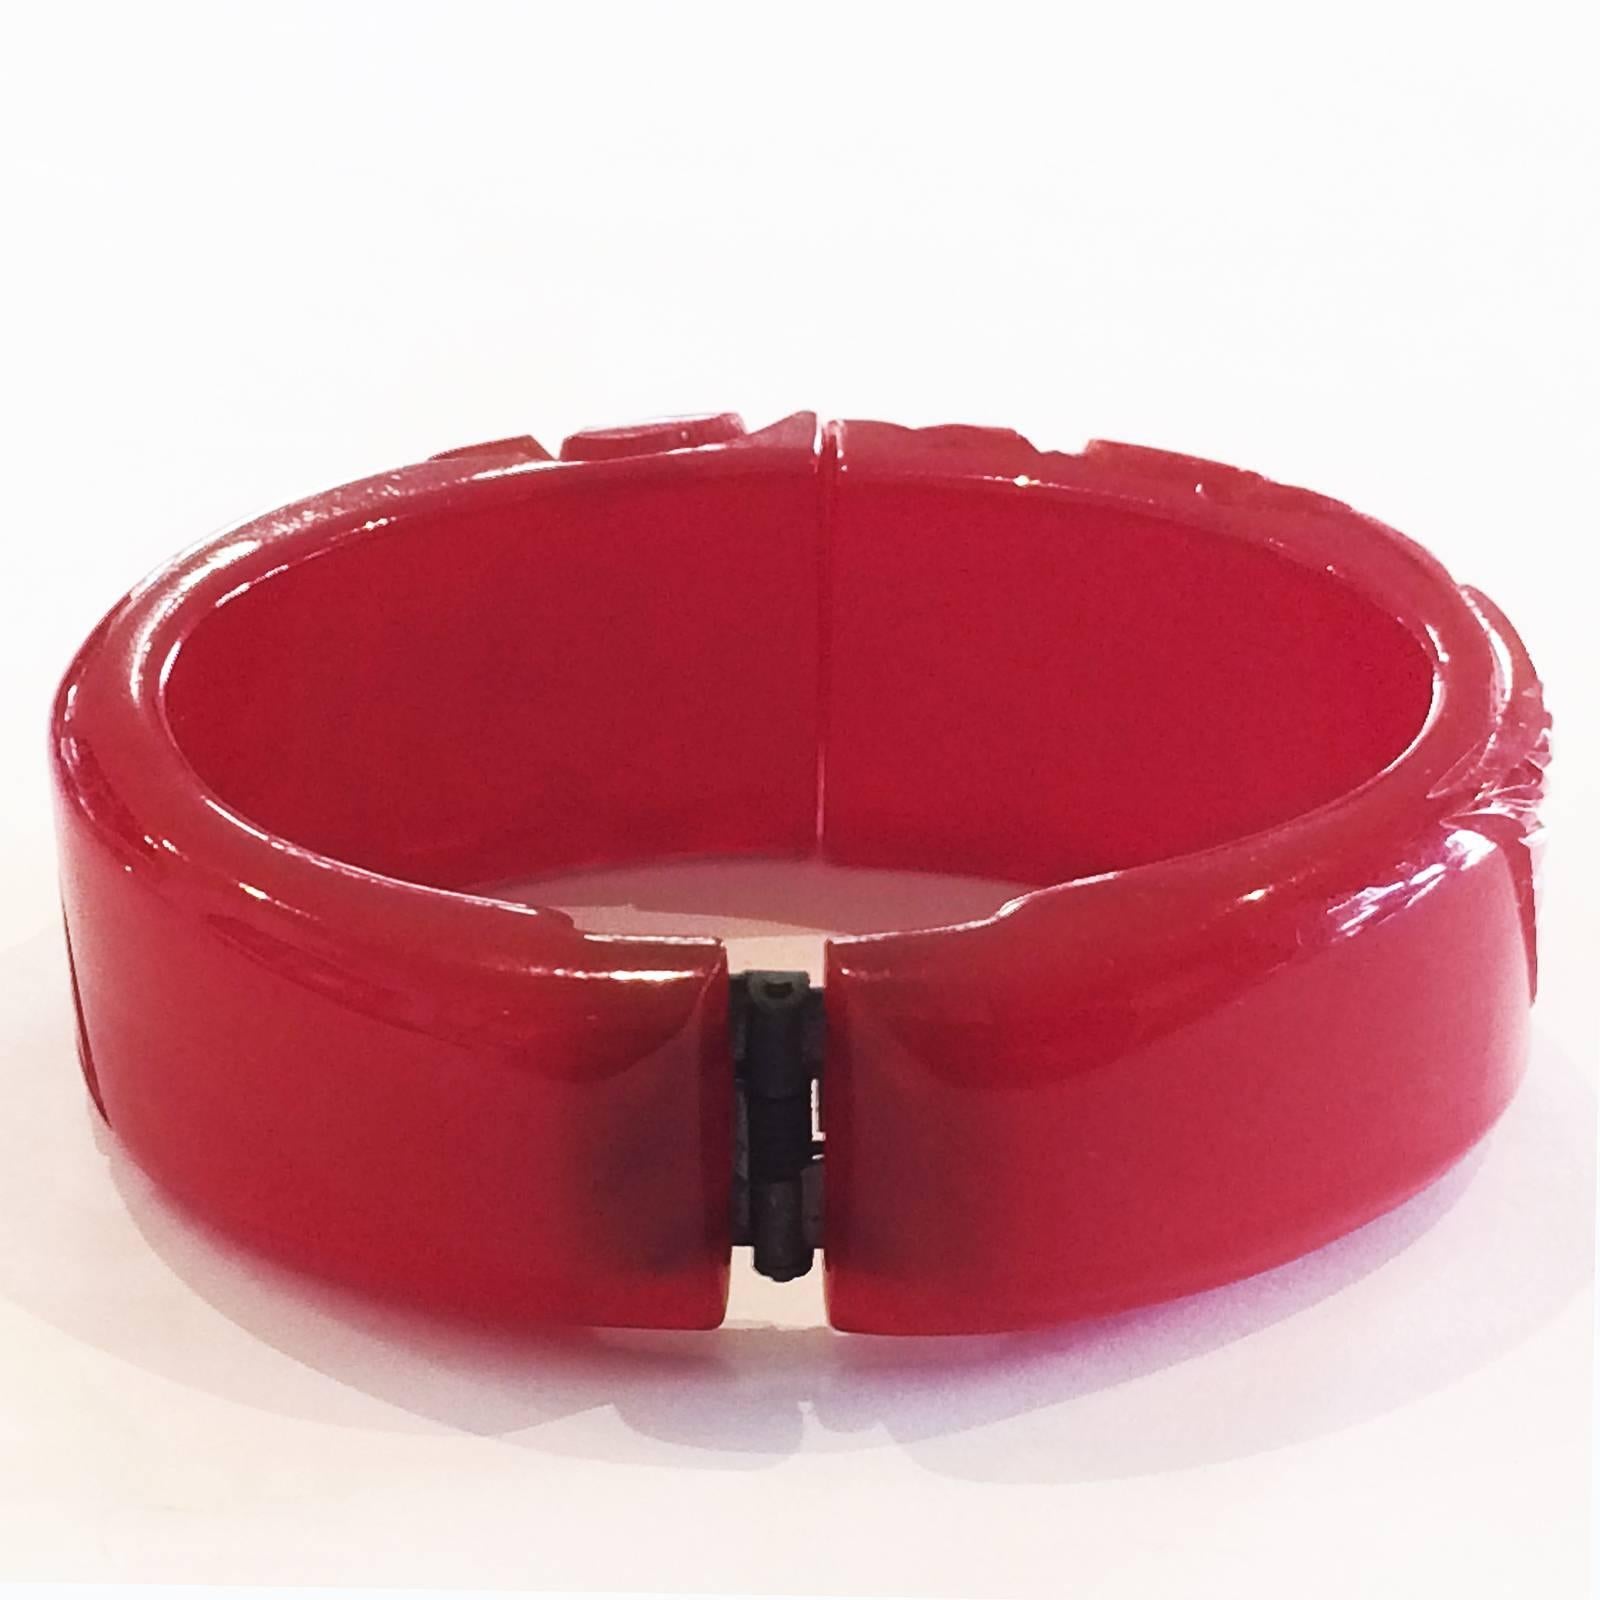 Art Deco deeply Carved Bakelite Hinged Clamper Bangle in brilliant Ruby red  In Excellent Condition For Sale In Daylesford, Victoria